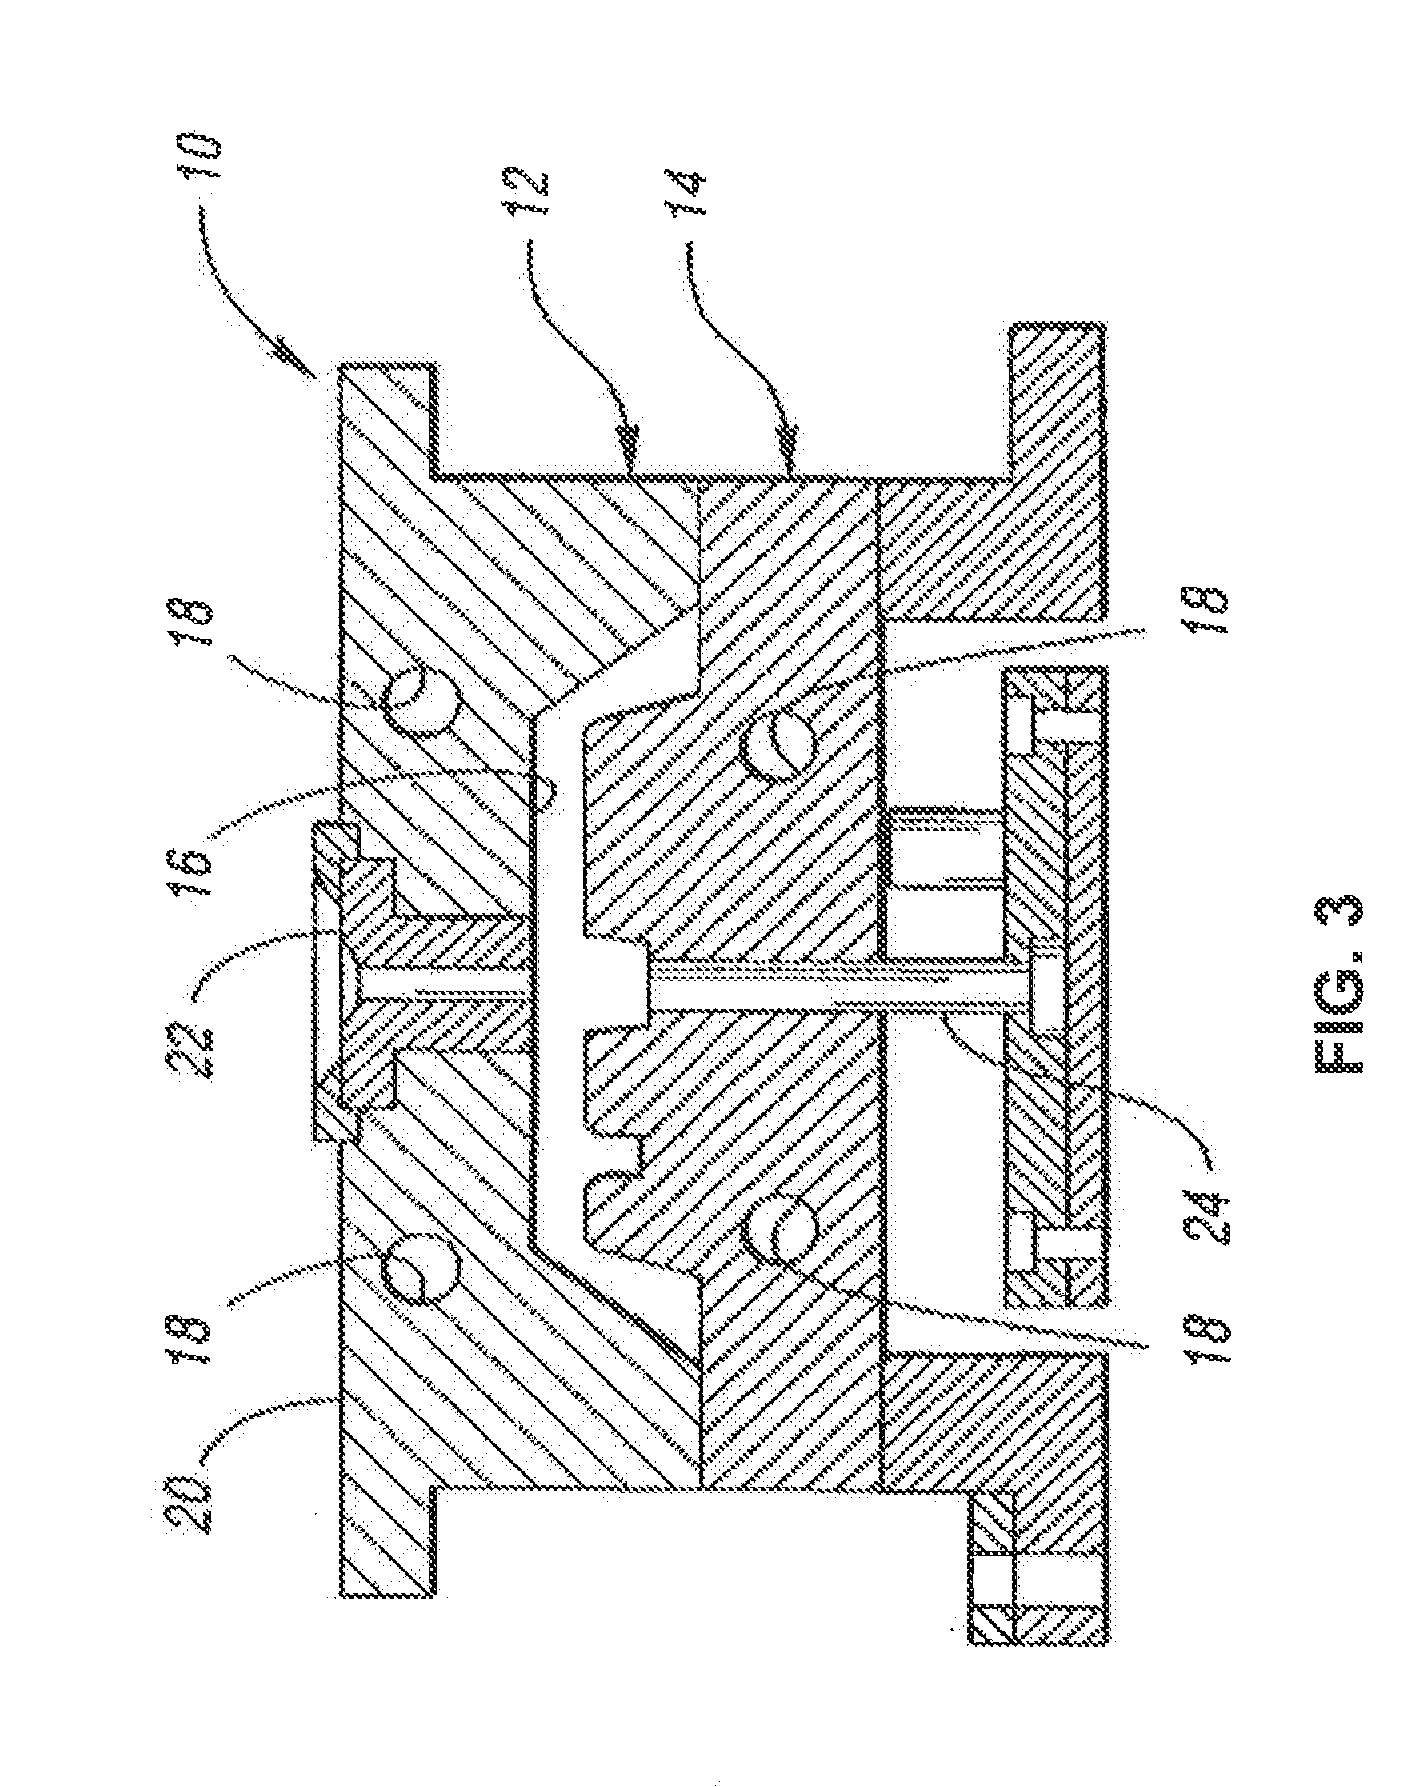 Process for forming low halogen content polyarylene sulfides